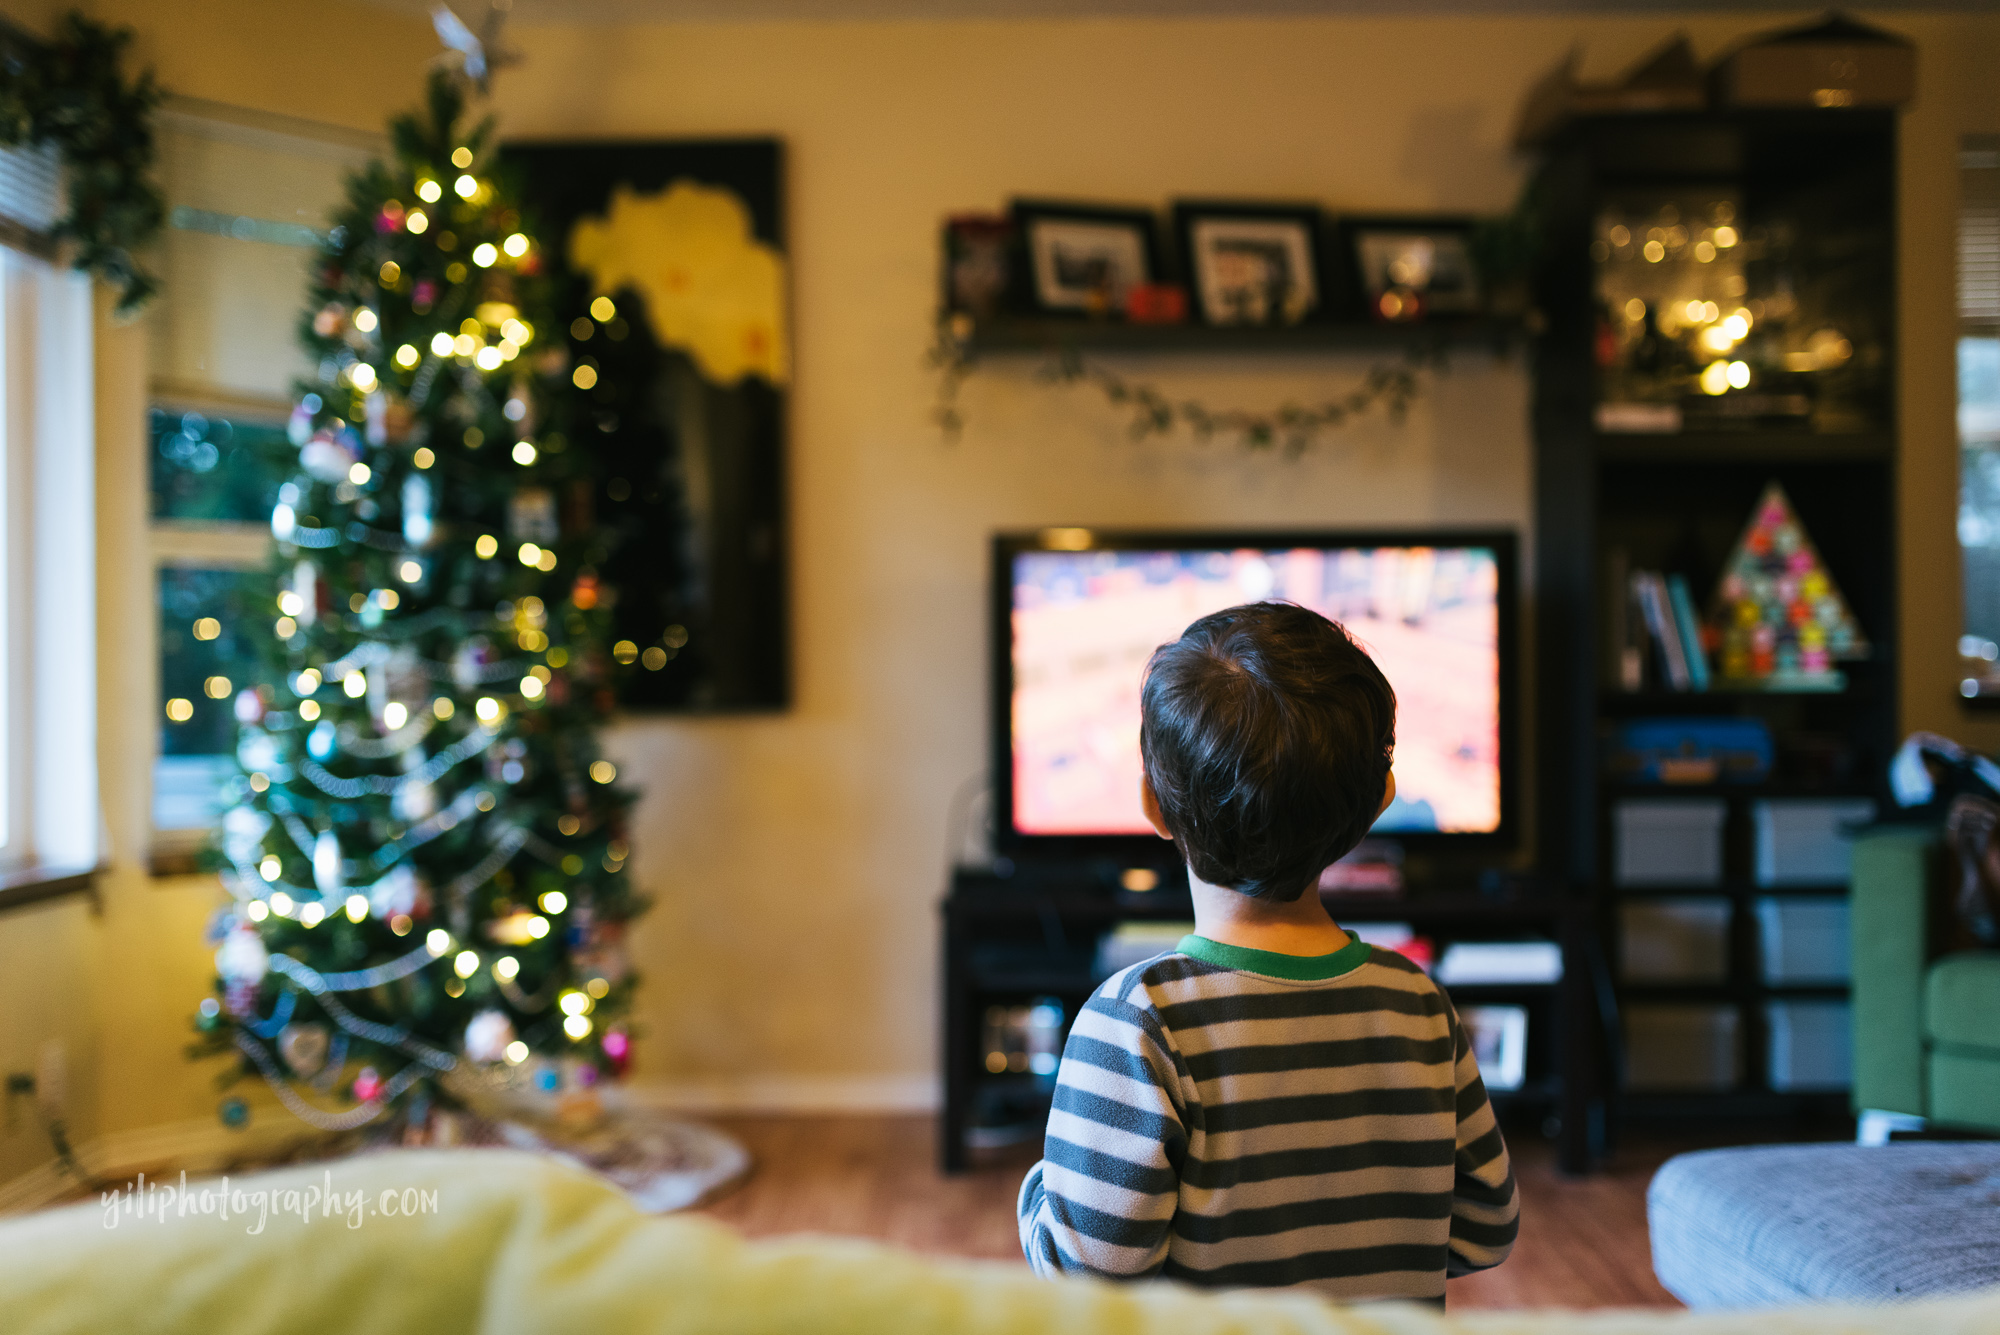 Seattle little boy looking at video game on television